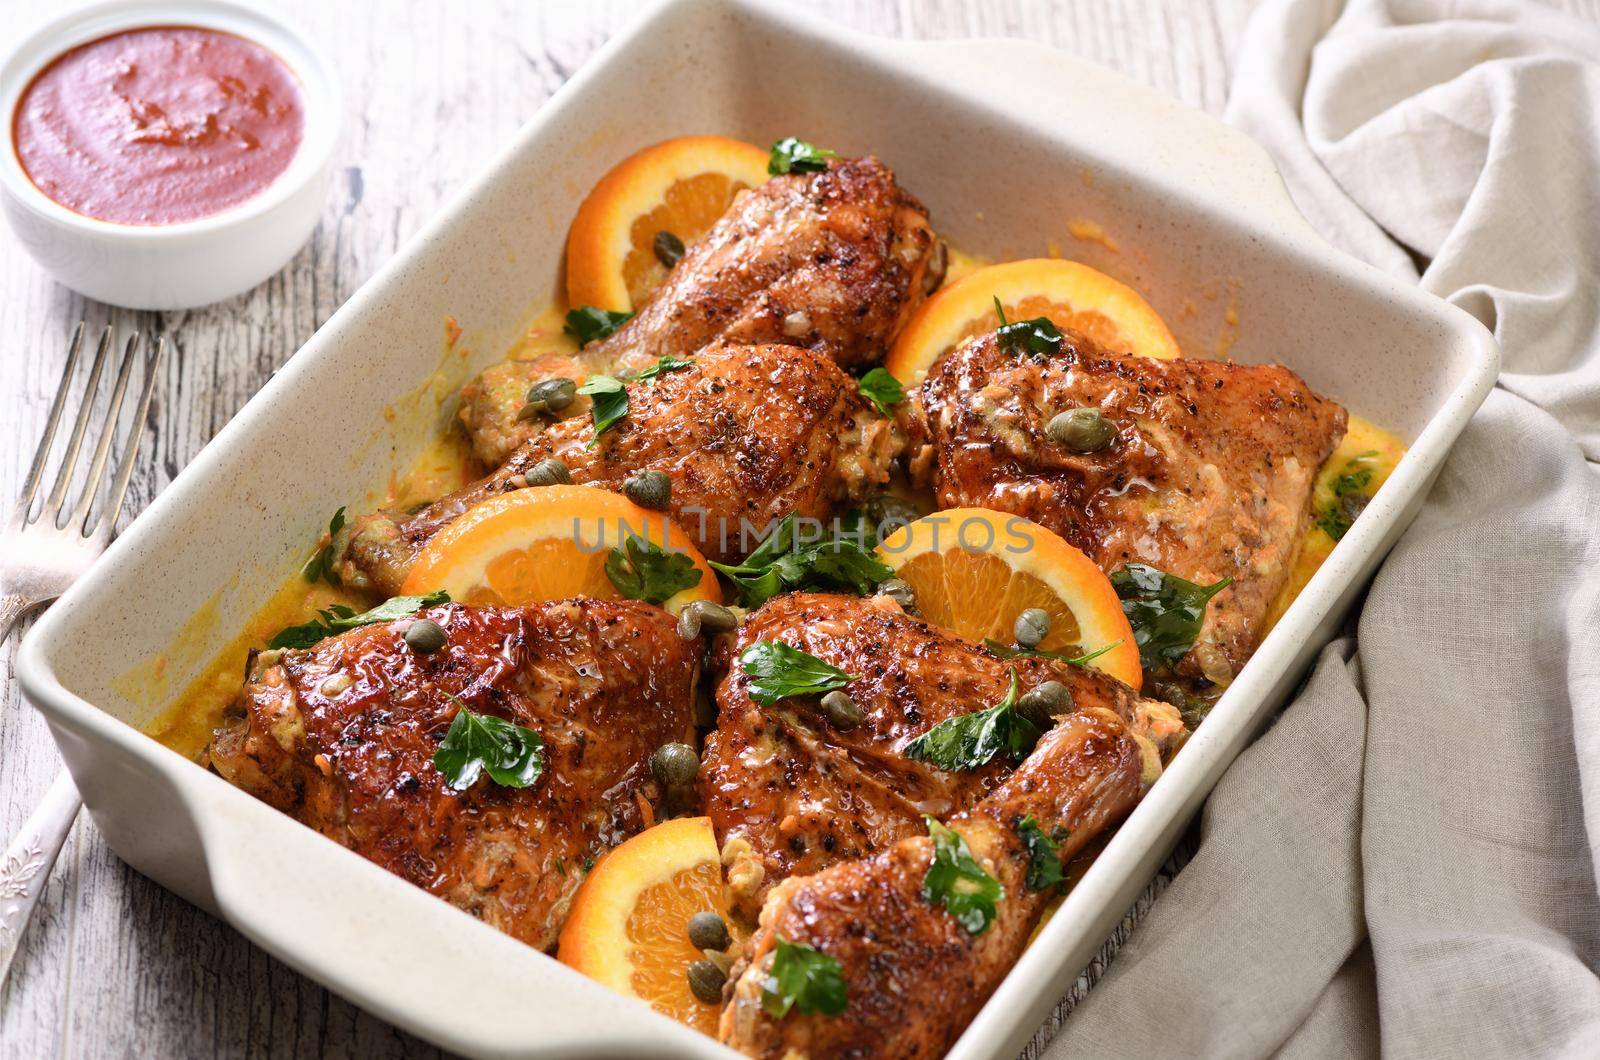 Slices of baked   chicken in a creamy sauce with oranges and capers in a baking dish